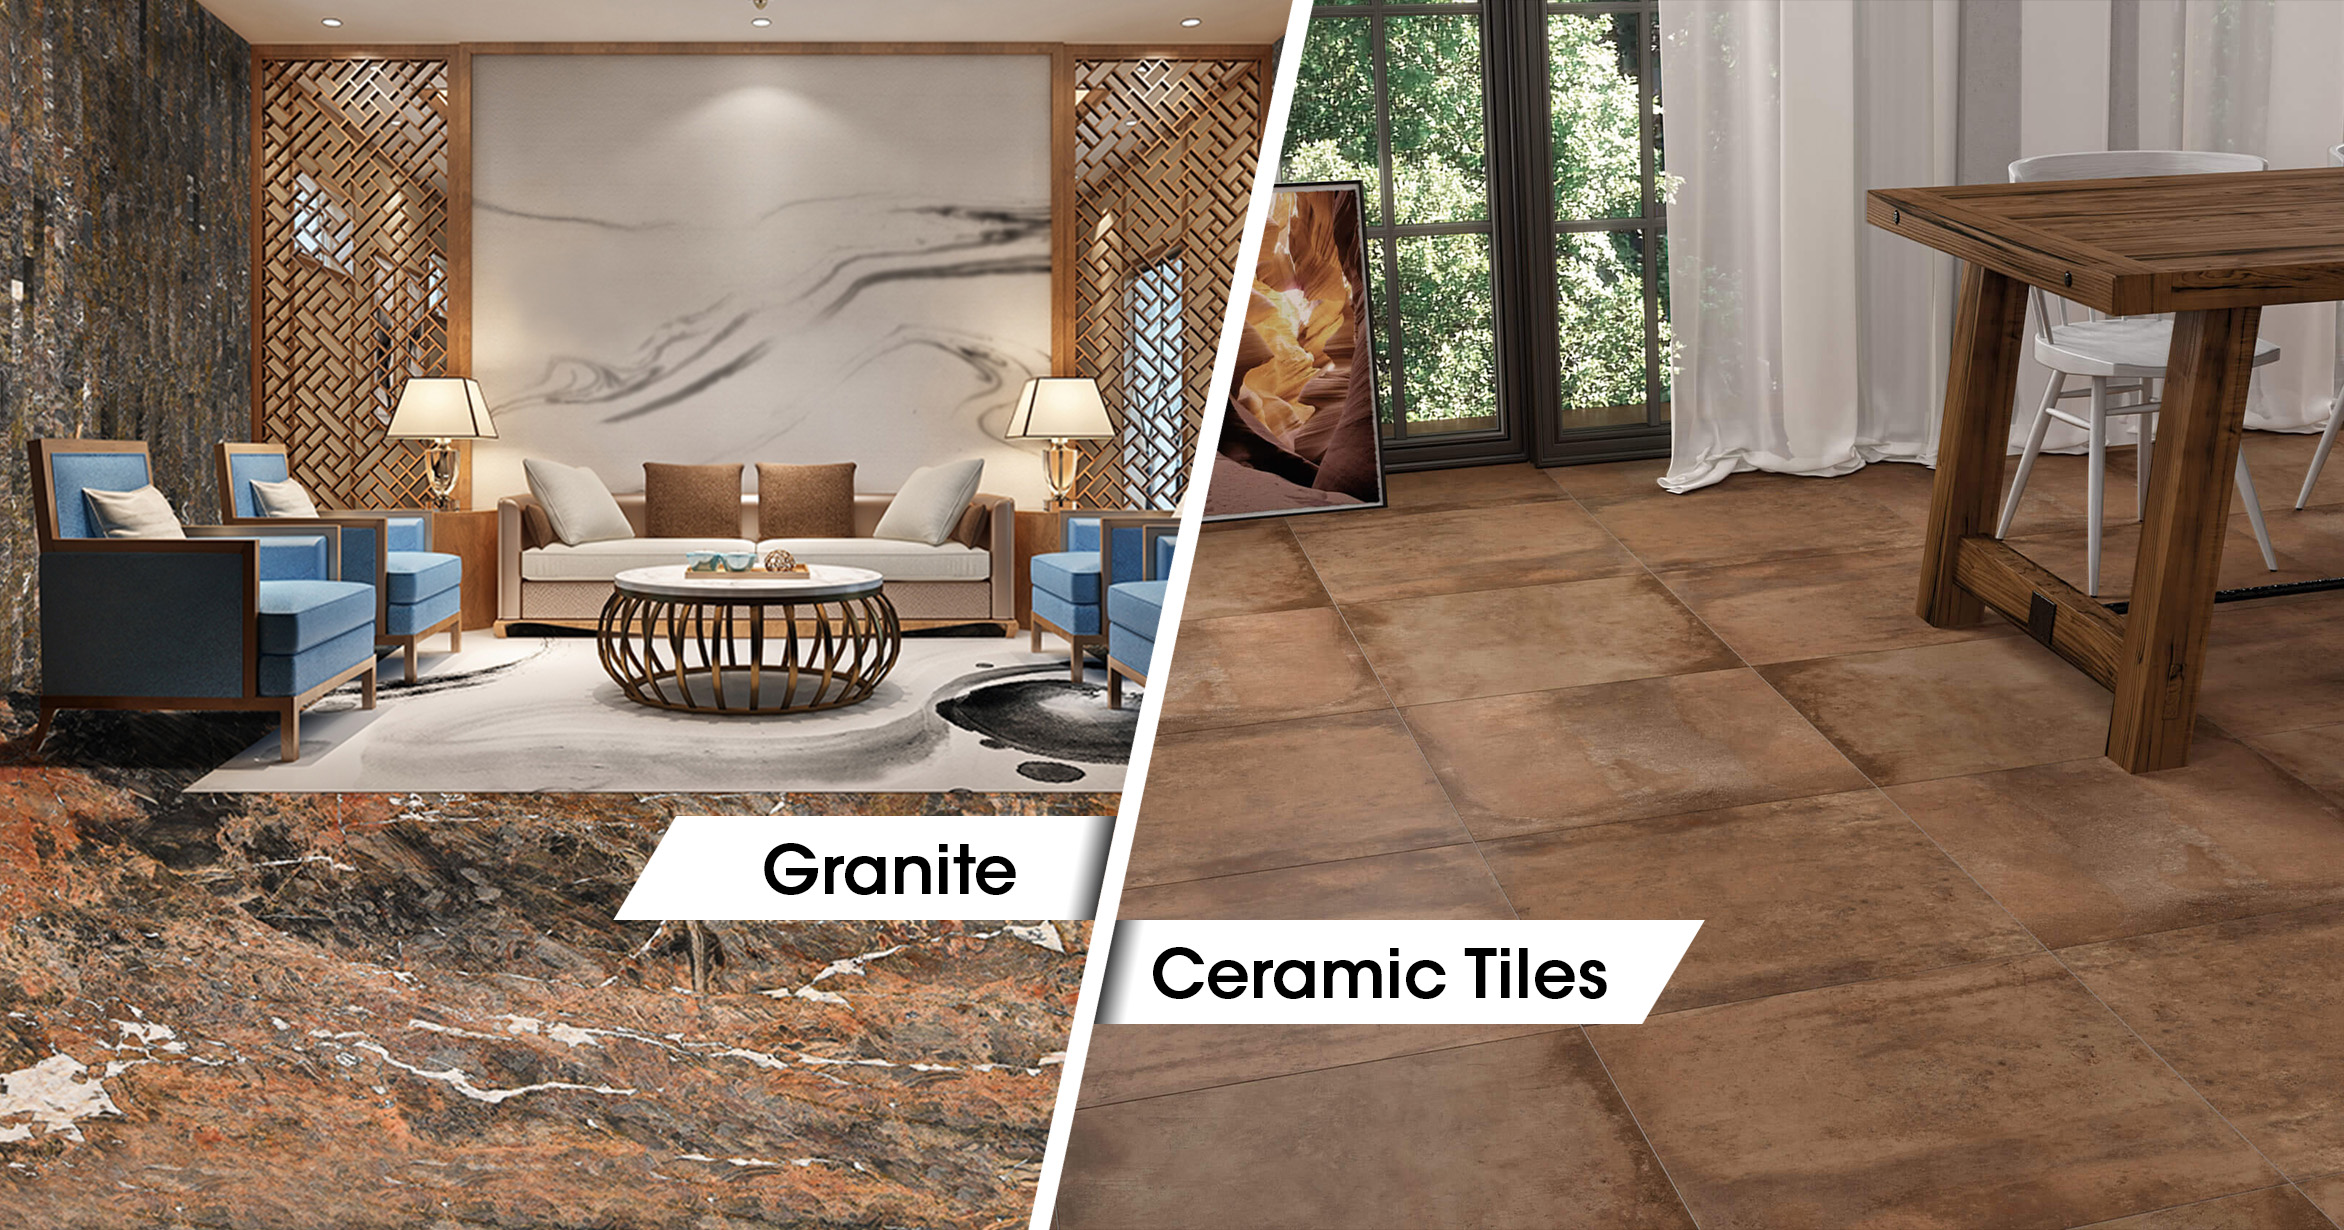 Granite vs. Ceramic tiles: Which is better for your home?